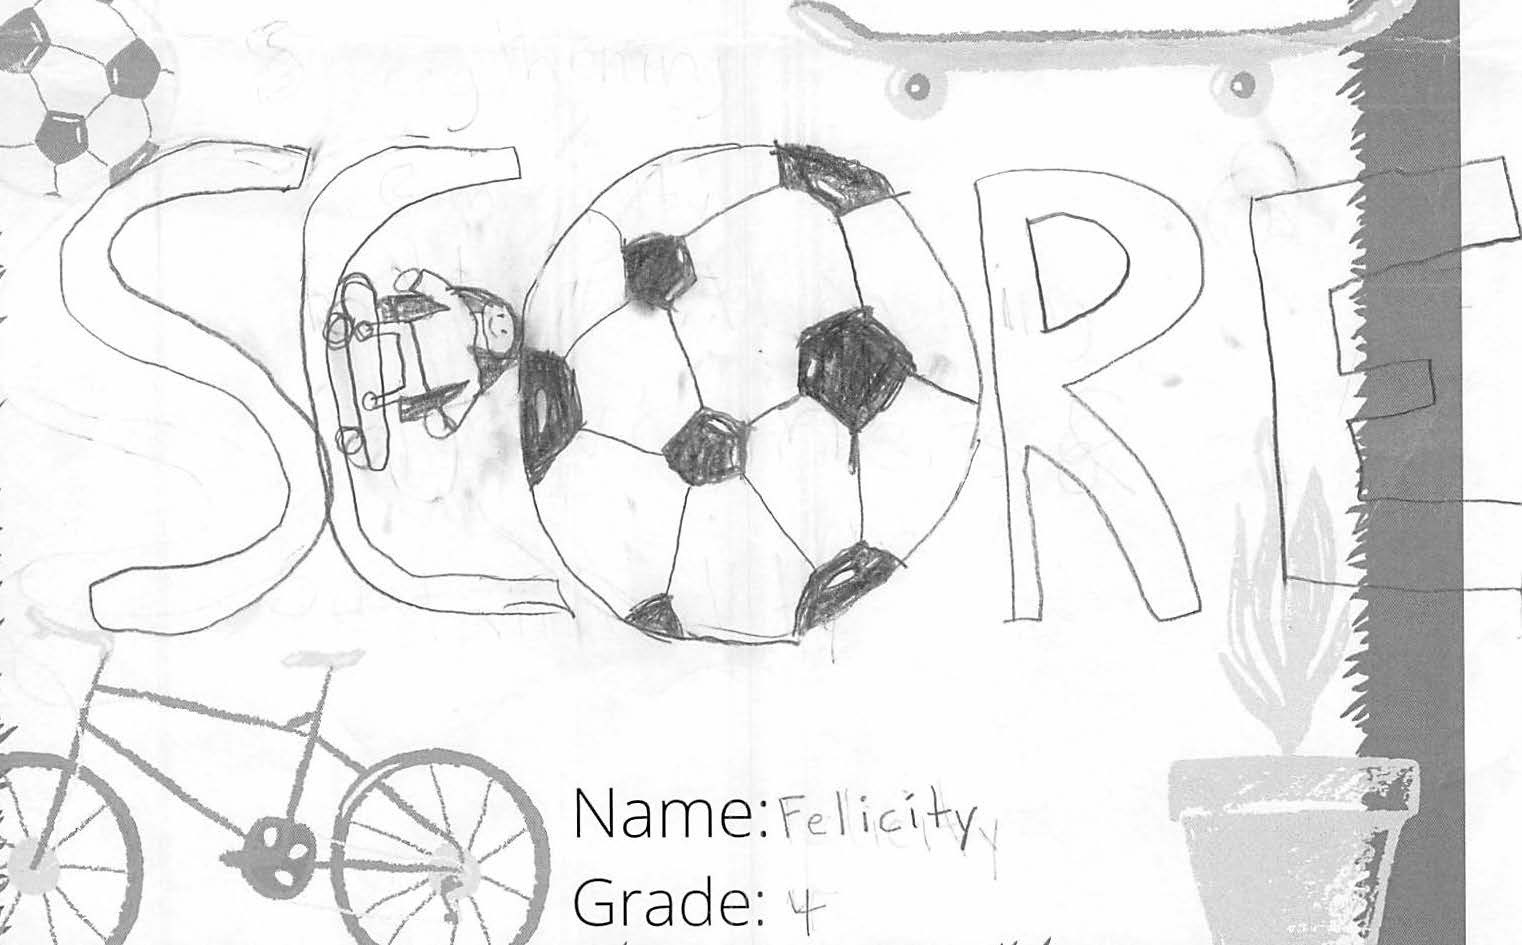 Pencil drawing for the SCORE! logo contest. The drawing includes the word 